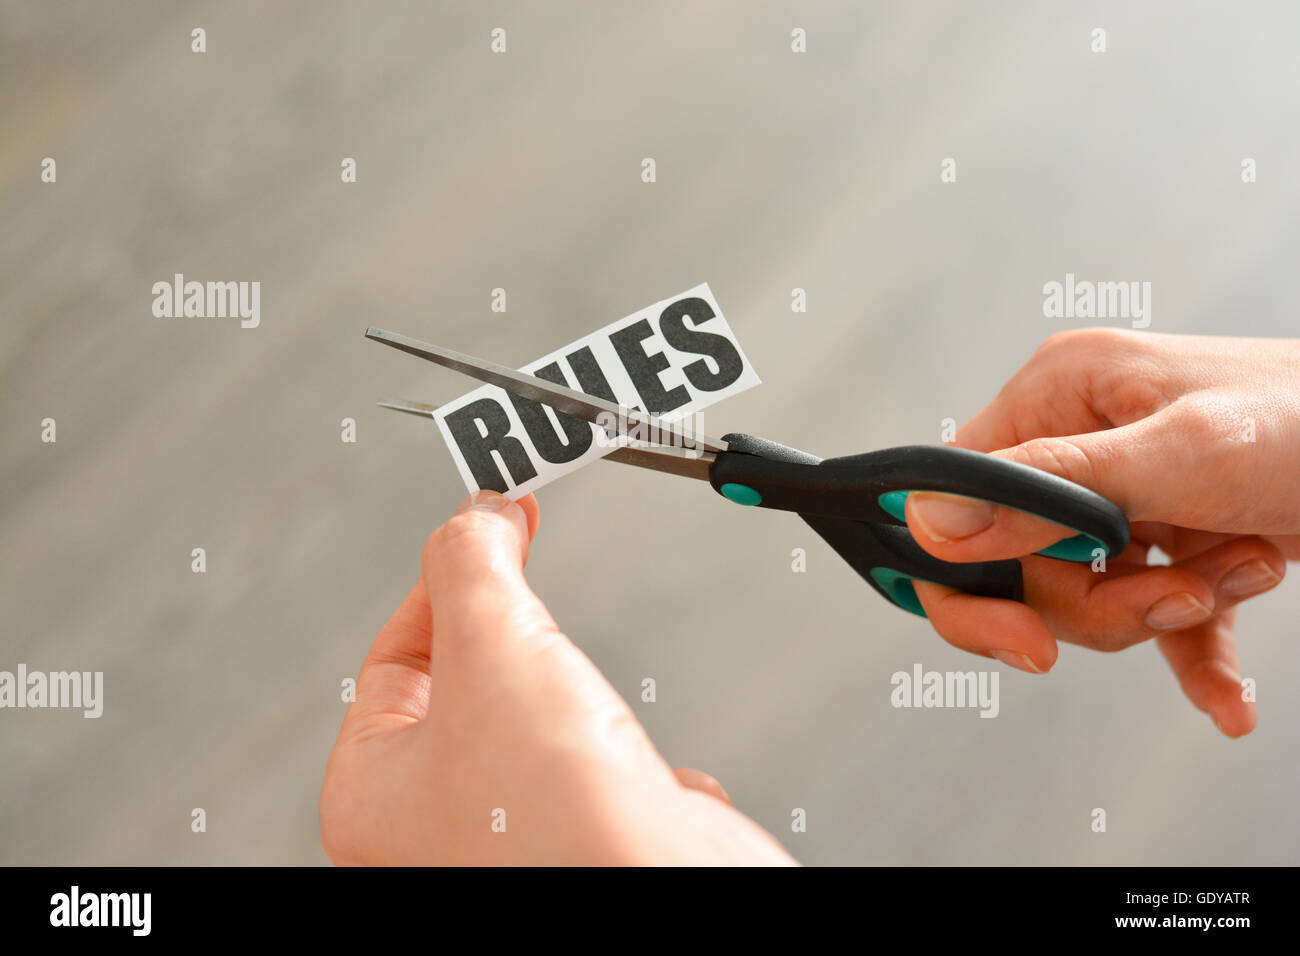 Woman hands cutting with scissors a printout reading 'RULES' Stock Photo